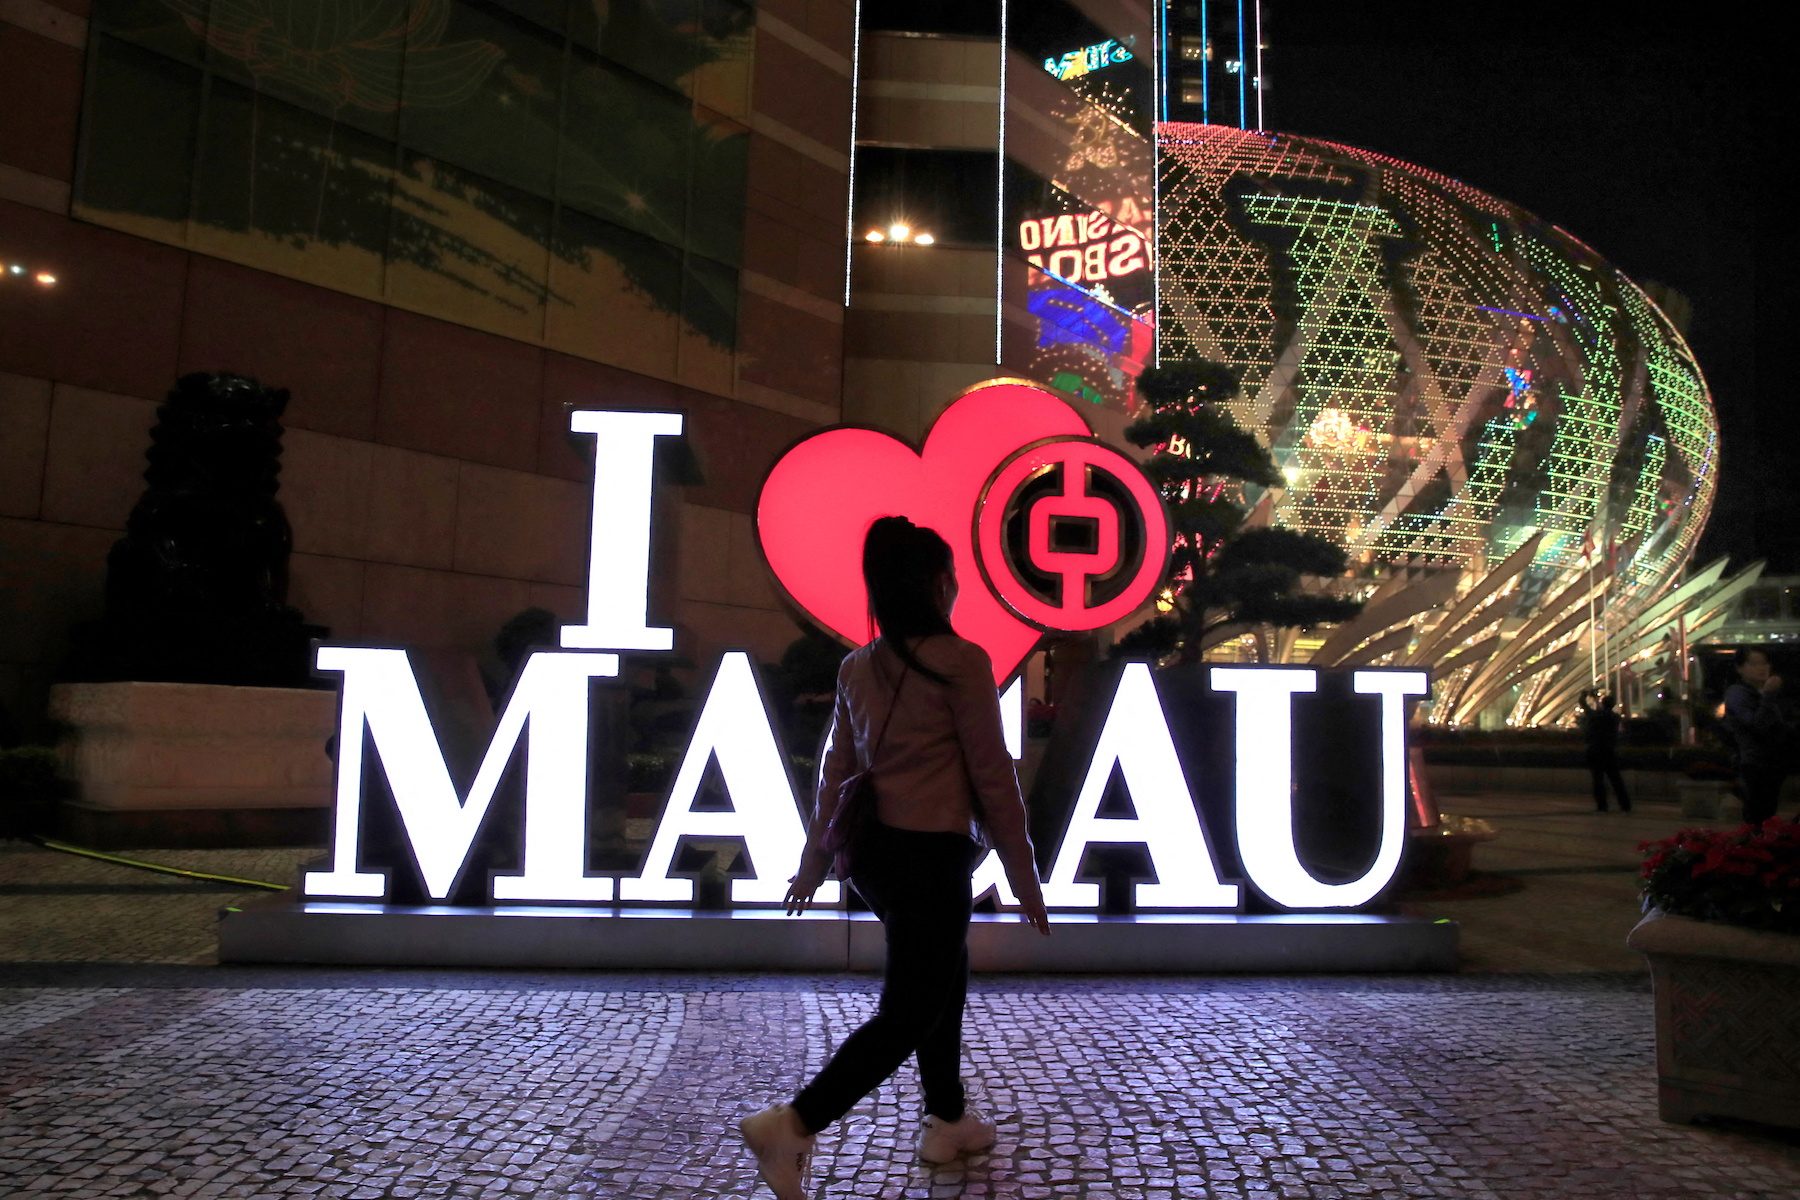 Macau finalizes gaming bill ahead of casino license extension